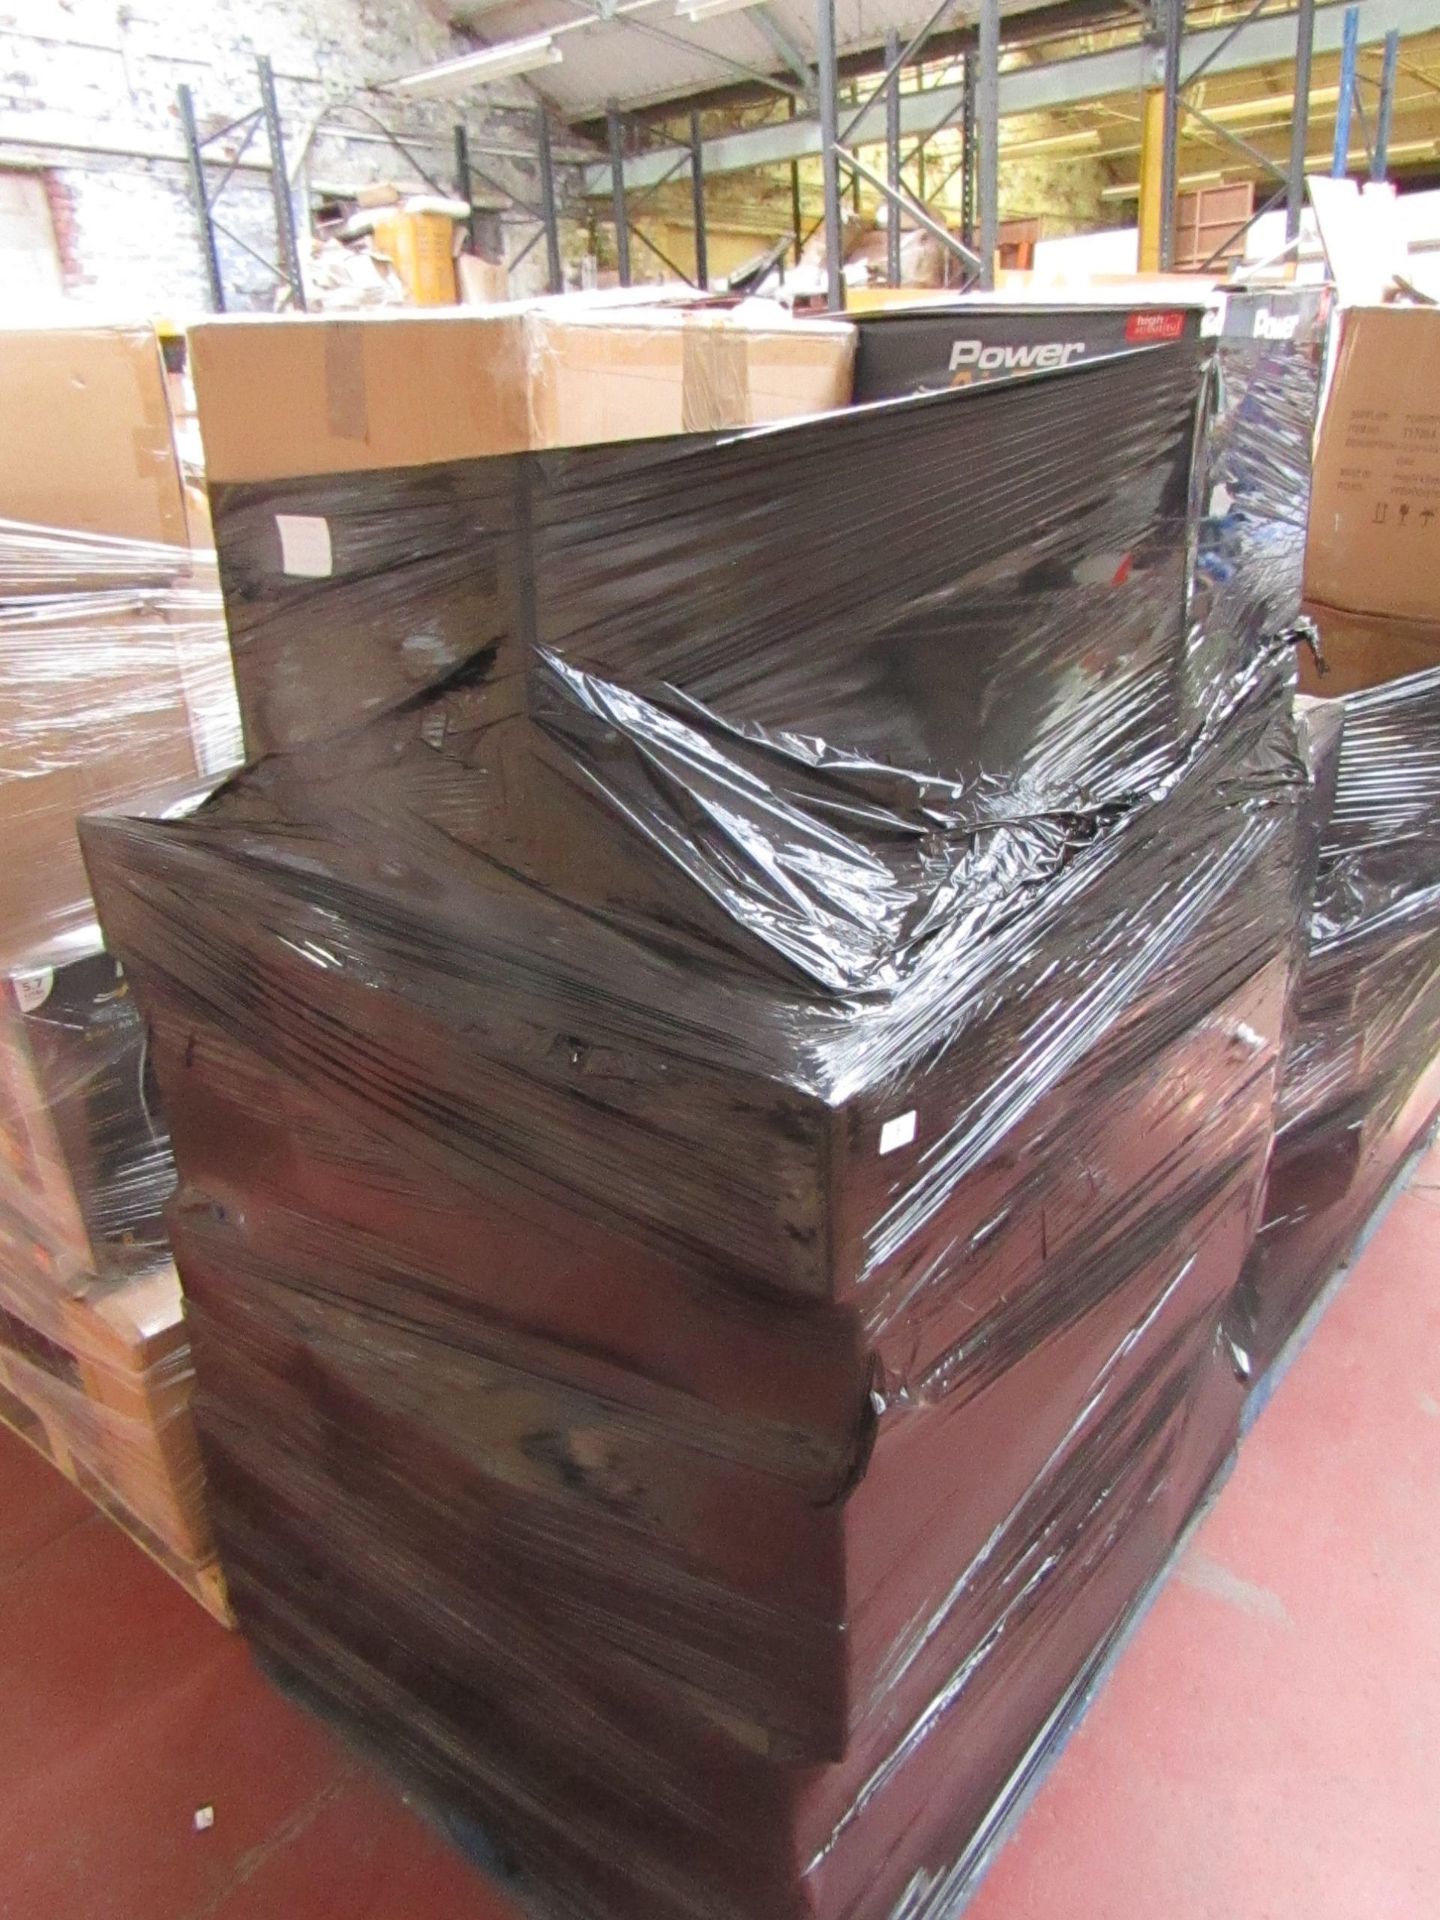 | 1X | PALLET OF RAW CUSTOMER ELECTRICAL RETURNS FROMA LARGE ONLINE RETAILER | UNCHECKED RETURNS |